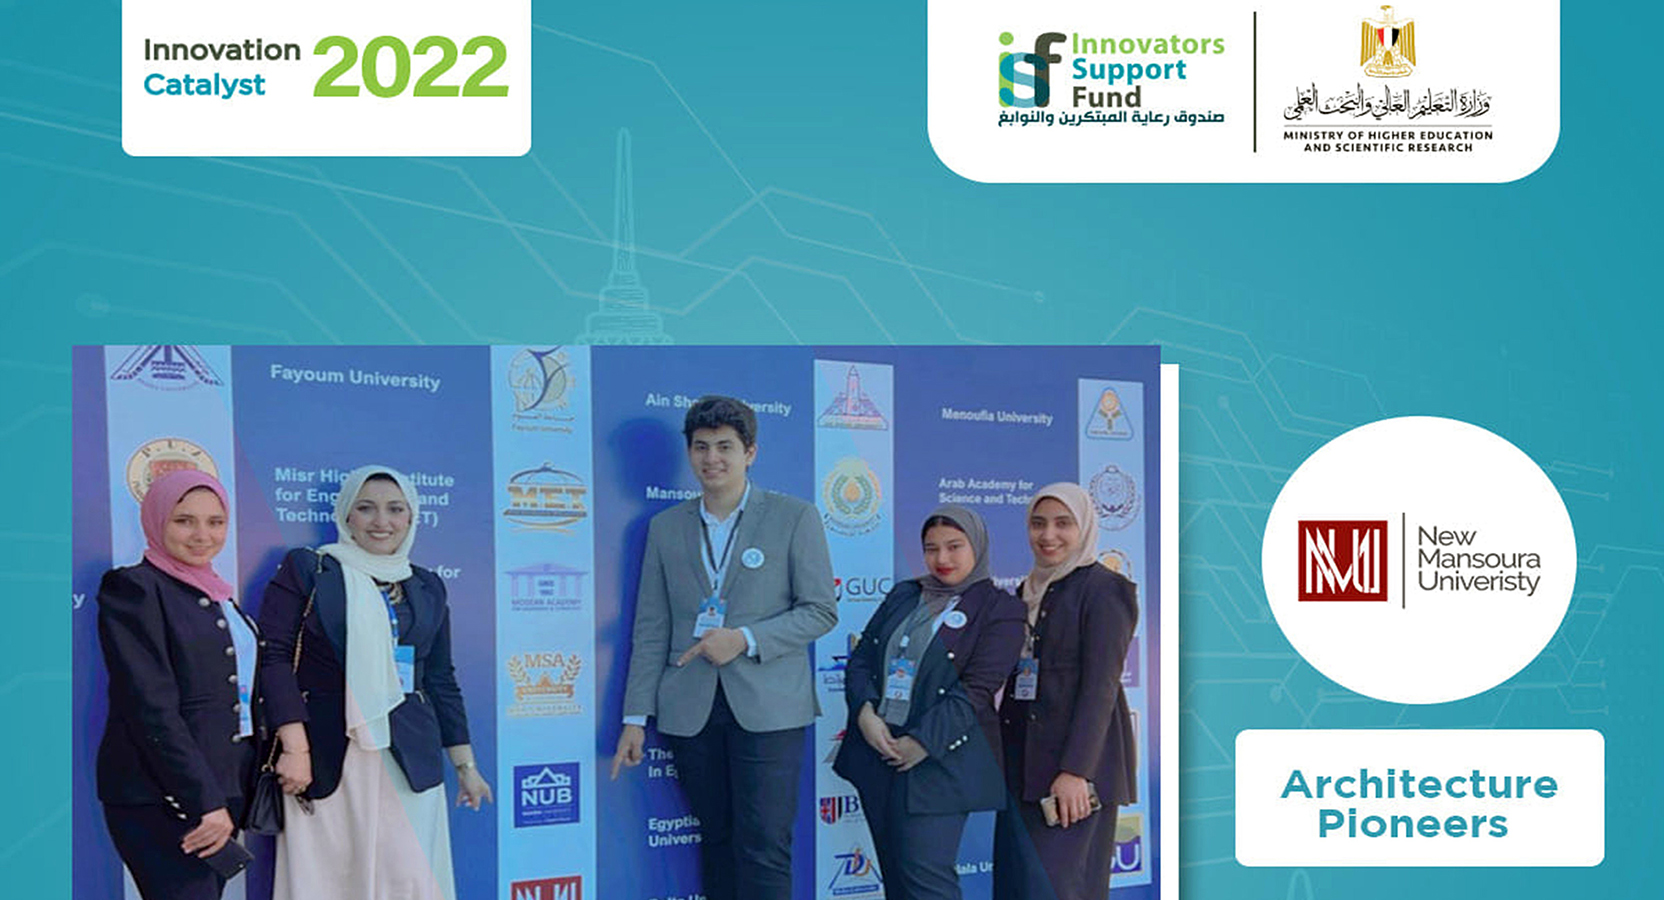 The Participation Of The Faculty Of Engineering, New Mansoura University, For A Research Team That Reached The Final Stage Of The Two Makers Competitions